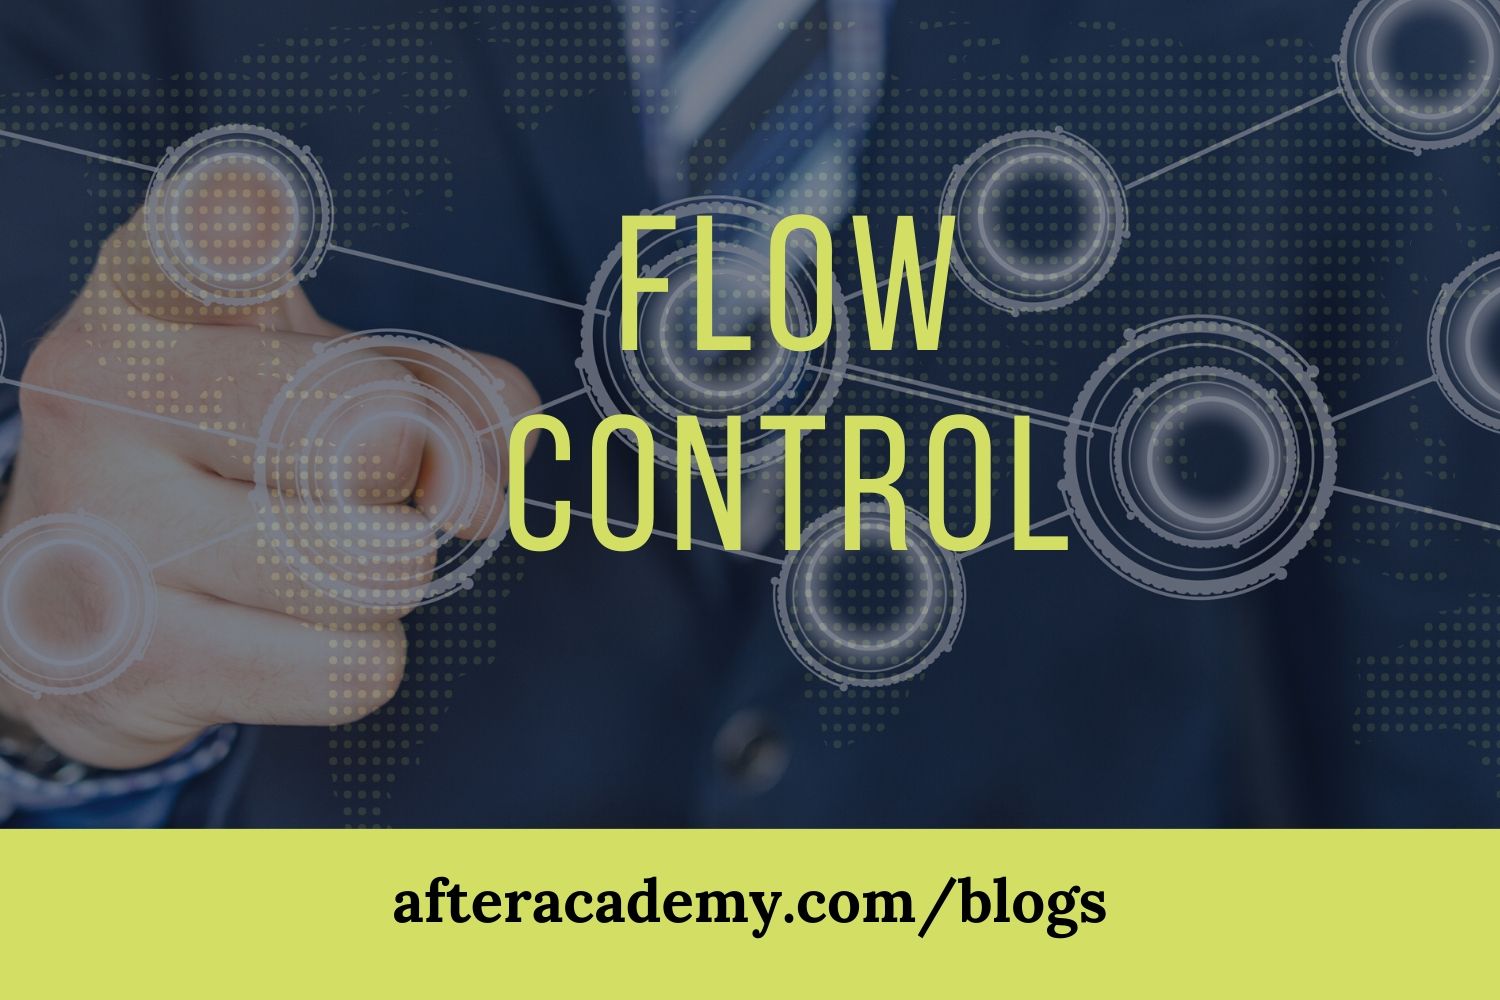 What is Flow-Control in networking?